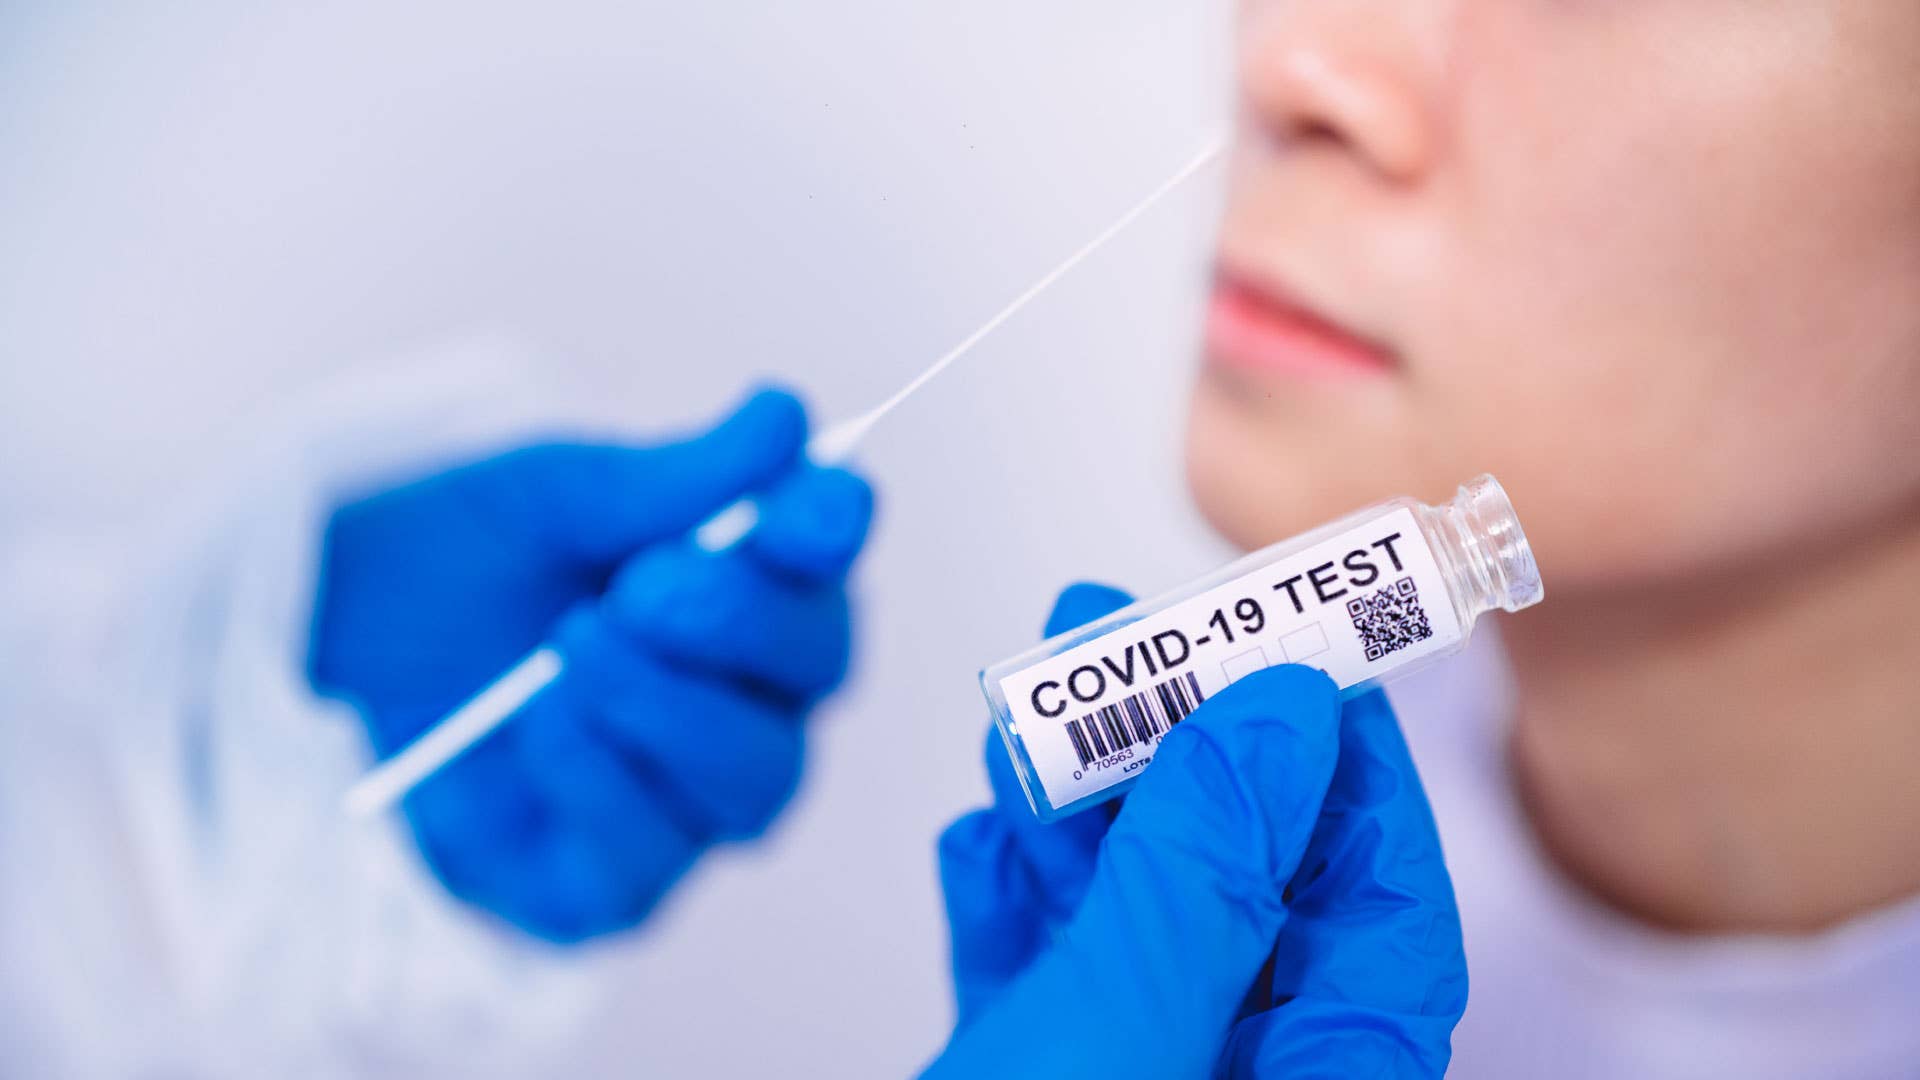 Stock photo of a COVID 19 test.